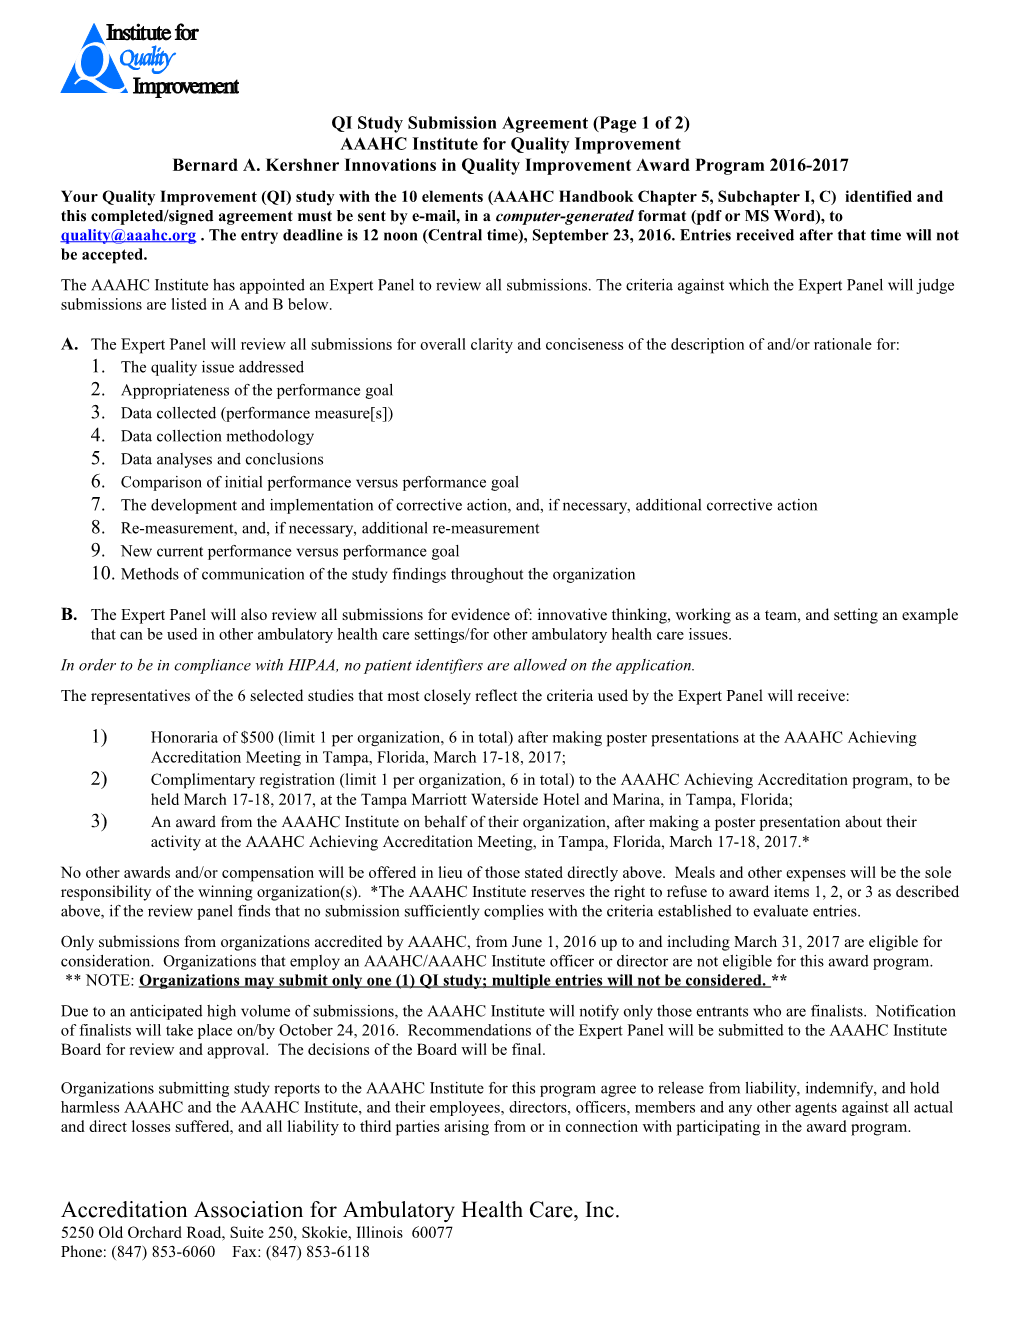 QI Study Submission Agreement (Page 1 of 2)